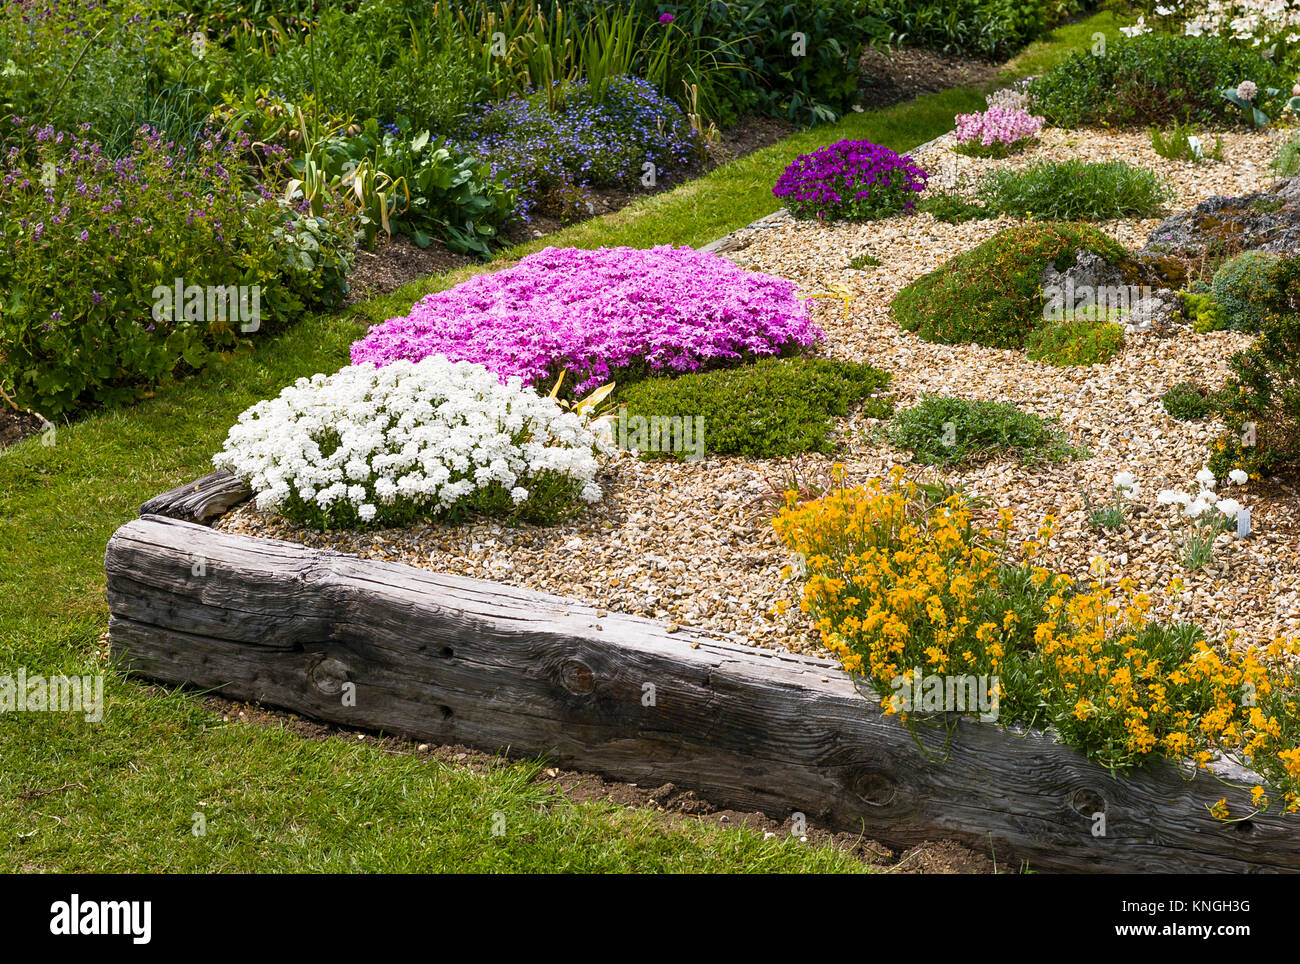 Raised alpine bed in an English nursery garden to show visitors possible planting combinations Stock Photo